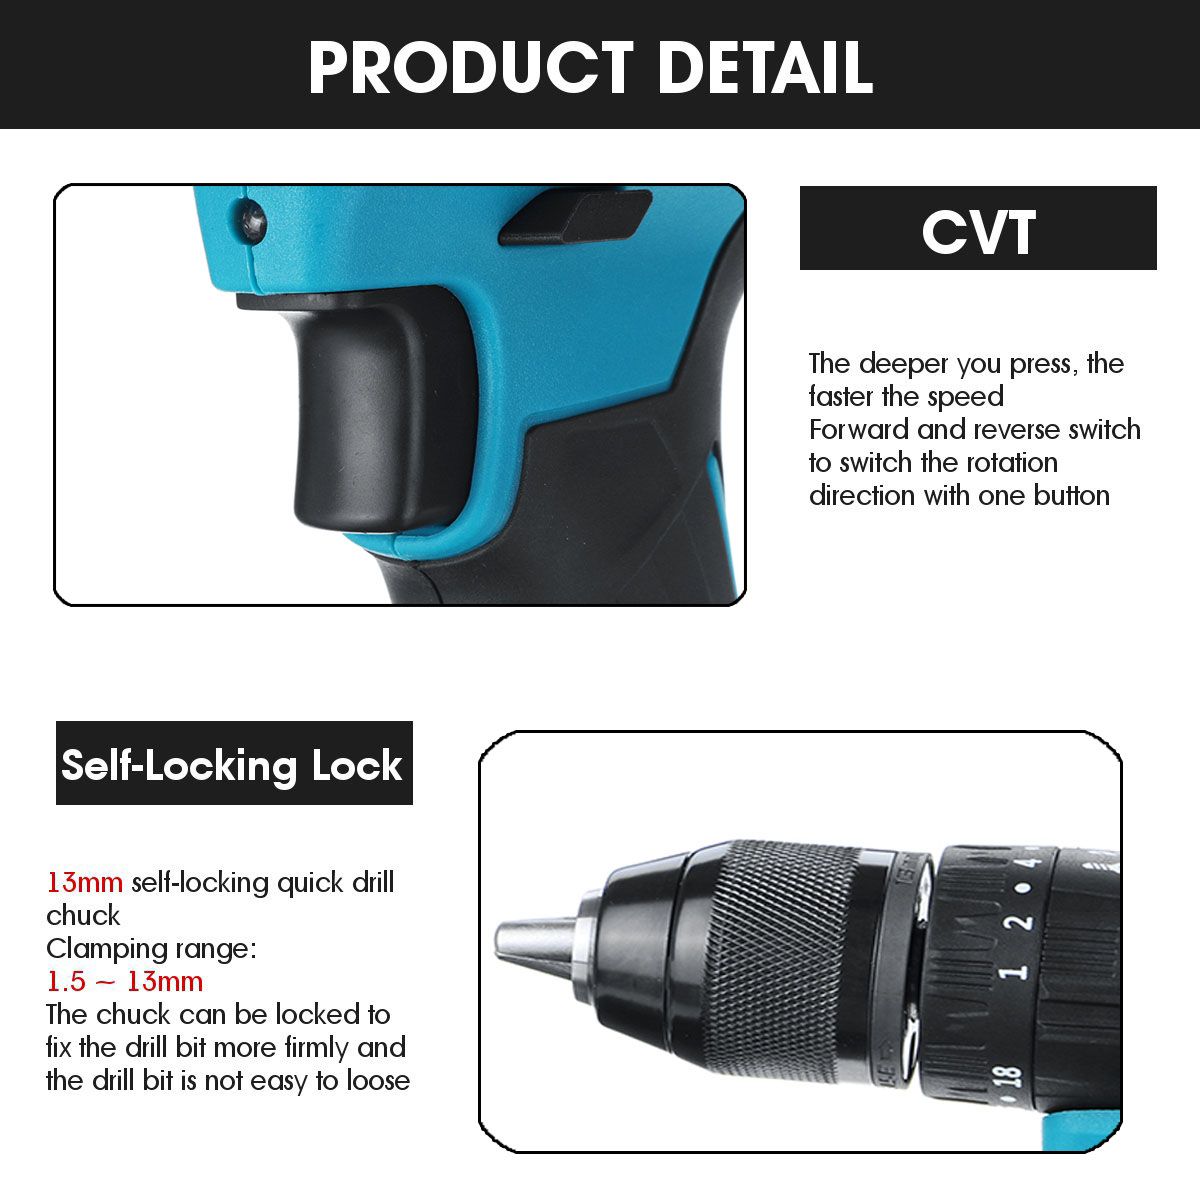 10mm-Chuck-Impact-Drill-350Nm-Cordless-Electric-Drill-For-Makita-18V-Battery-4000RPM-LED-Light-Power-1642853